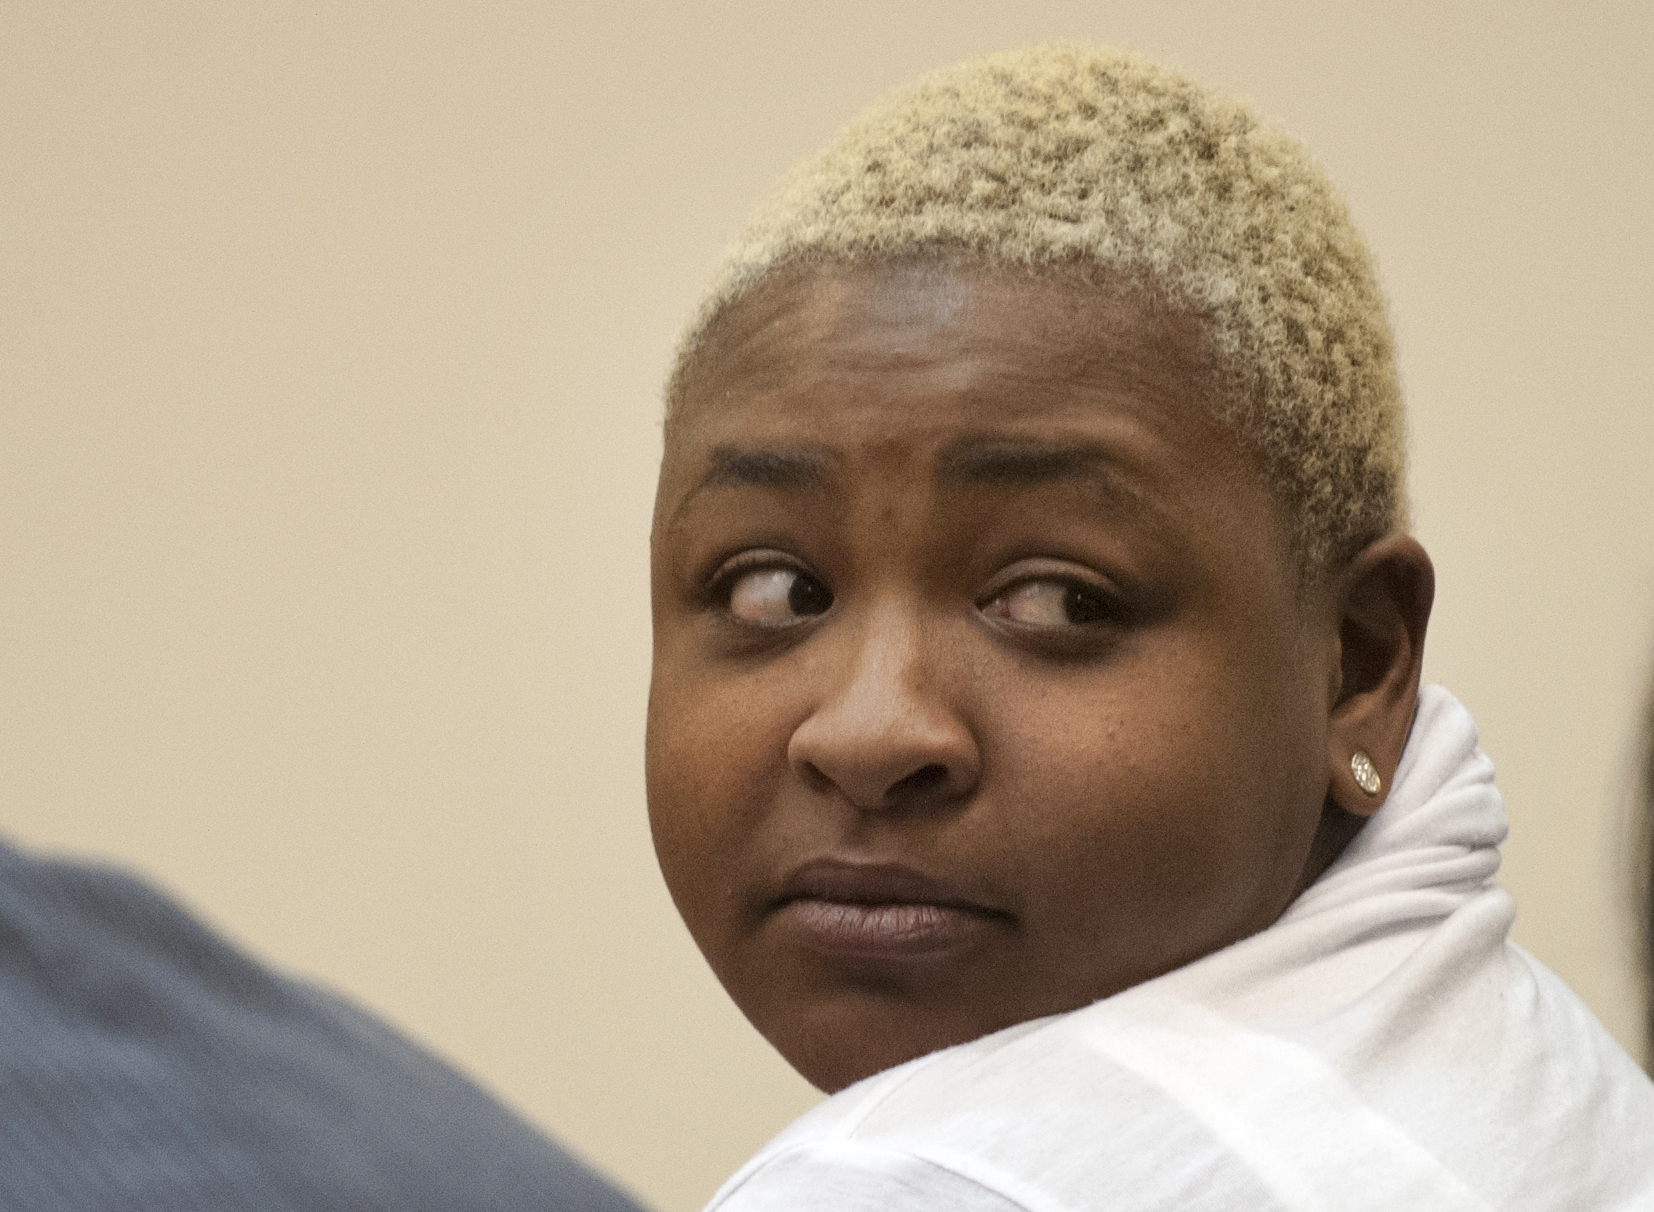 Shaneka Monique Torres looks around the courtroom before being found guilty on all charges related to her shooting a gun into a McDonald's when she failed to get bacon on her burger, Wednesday, March 25, 2015, in Grand Rapids, Mich